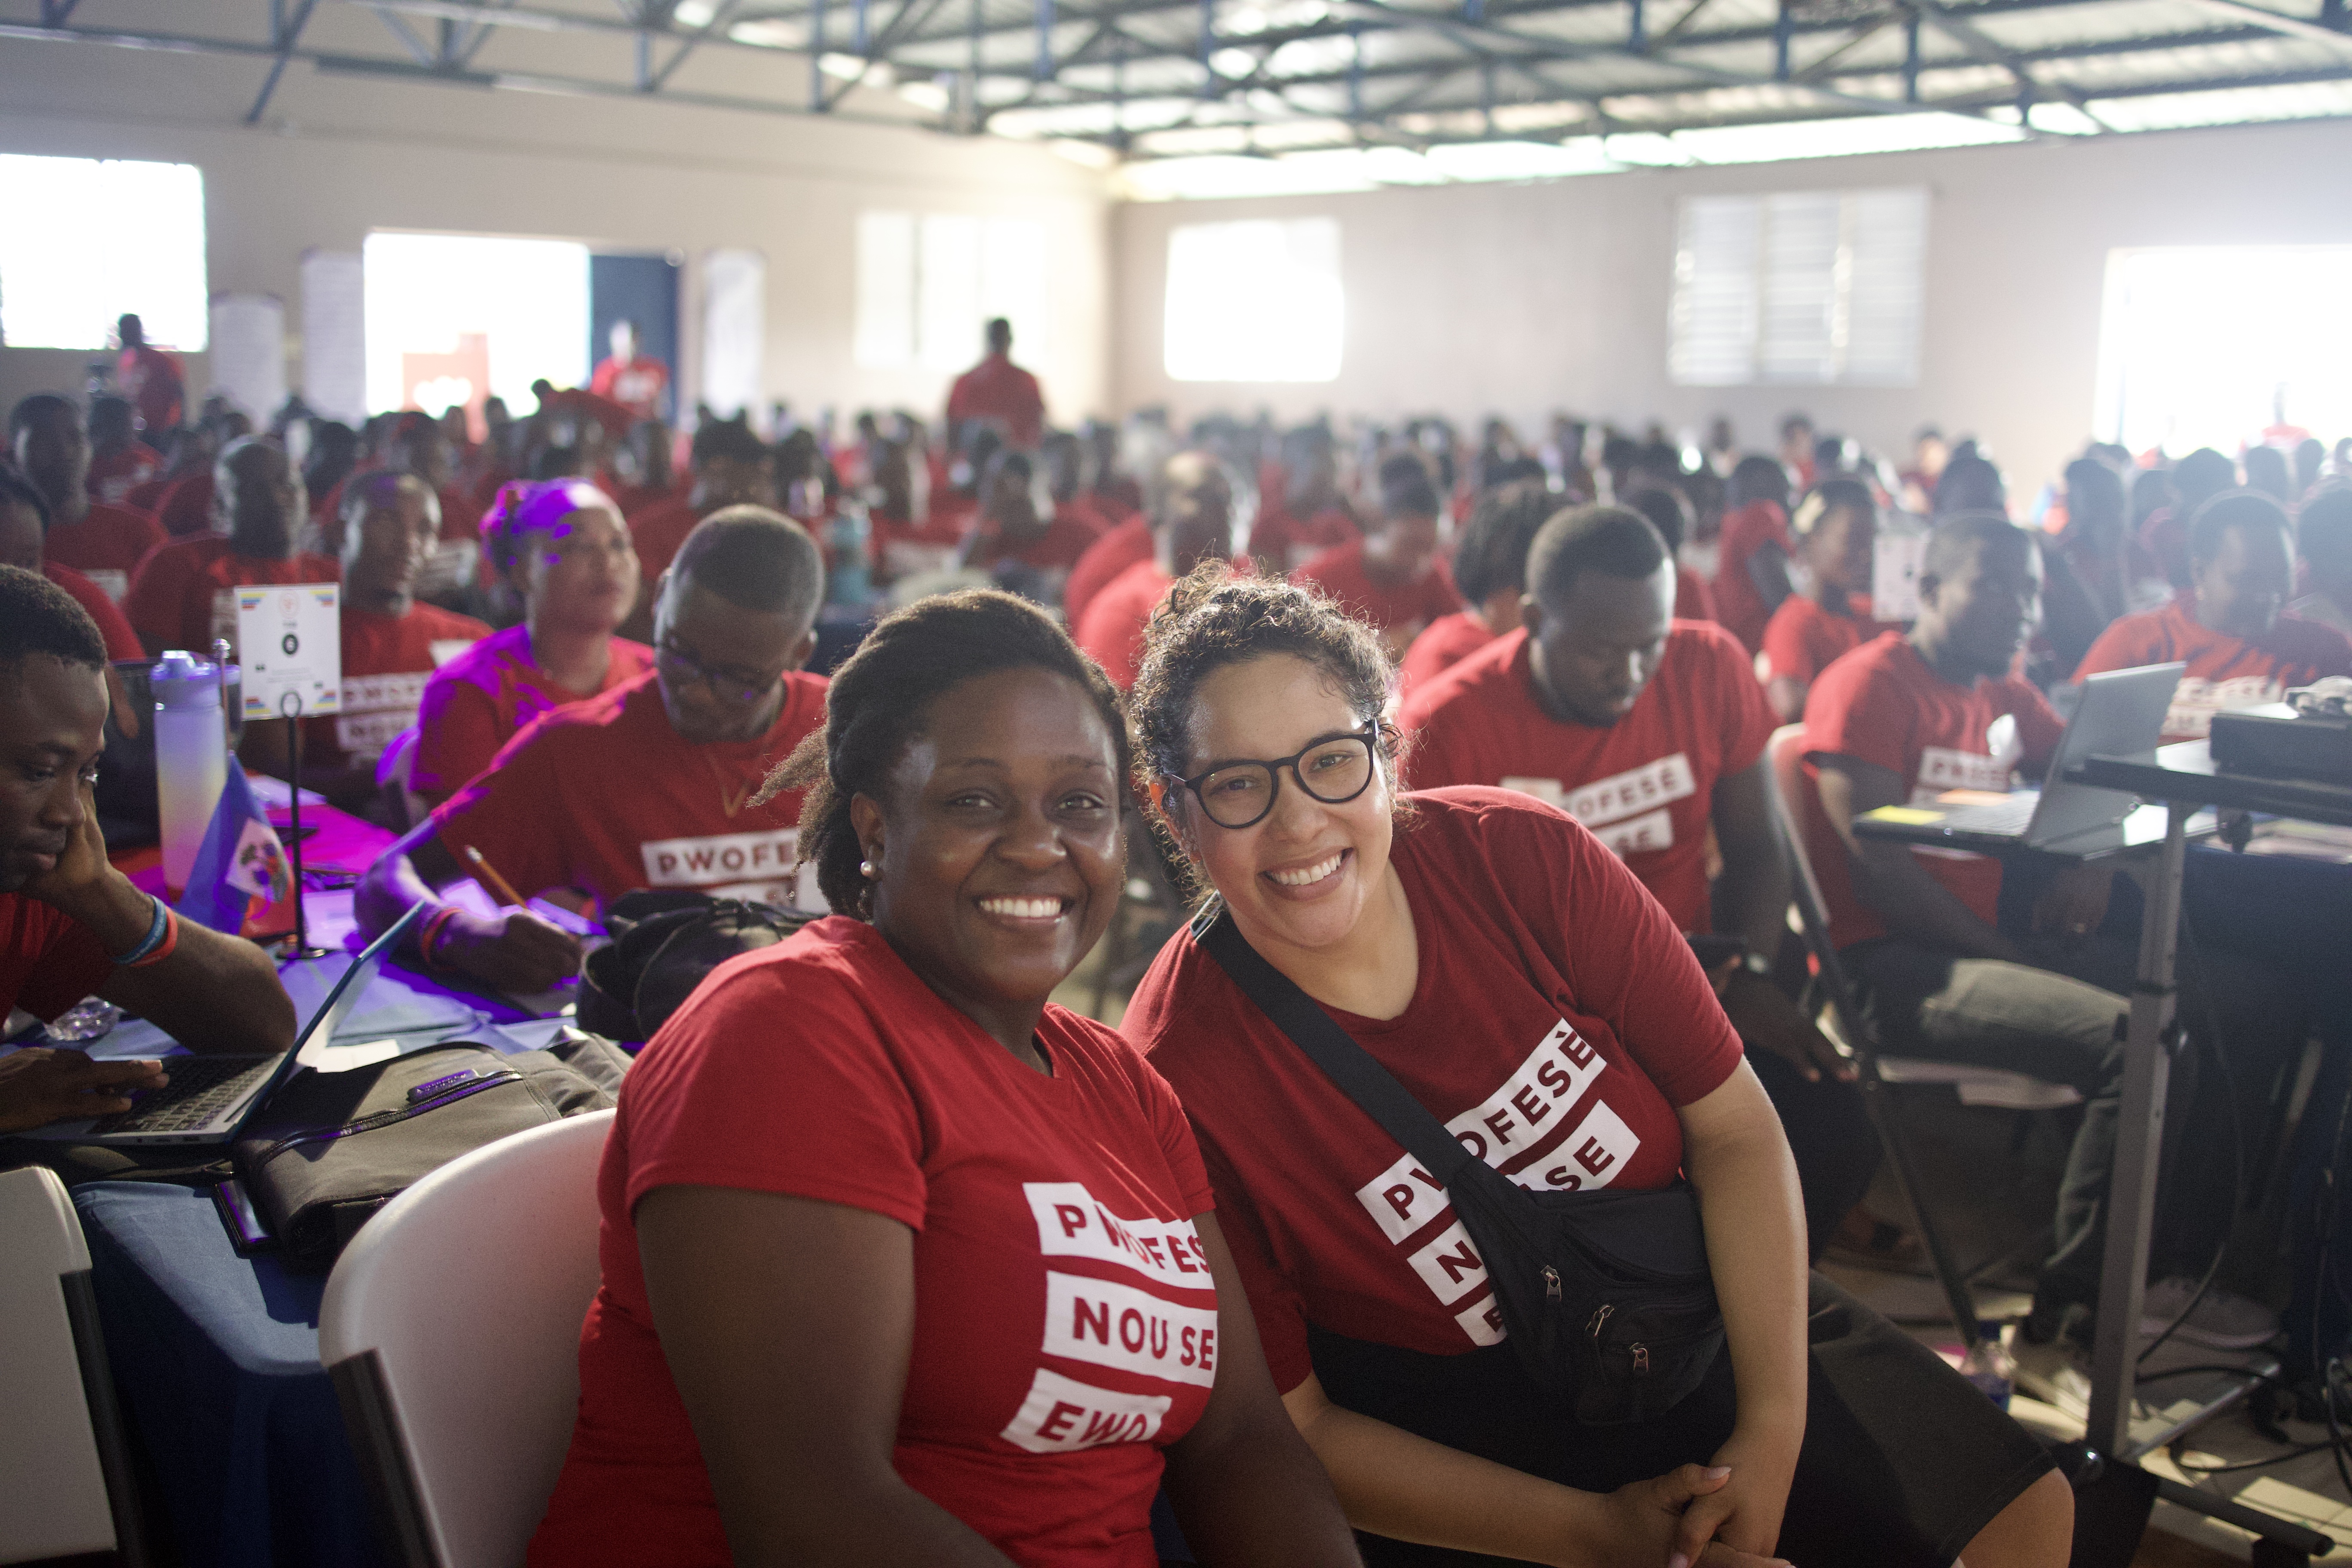 Two women in red shirts pose in a room full of people. 